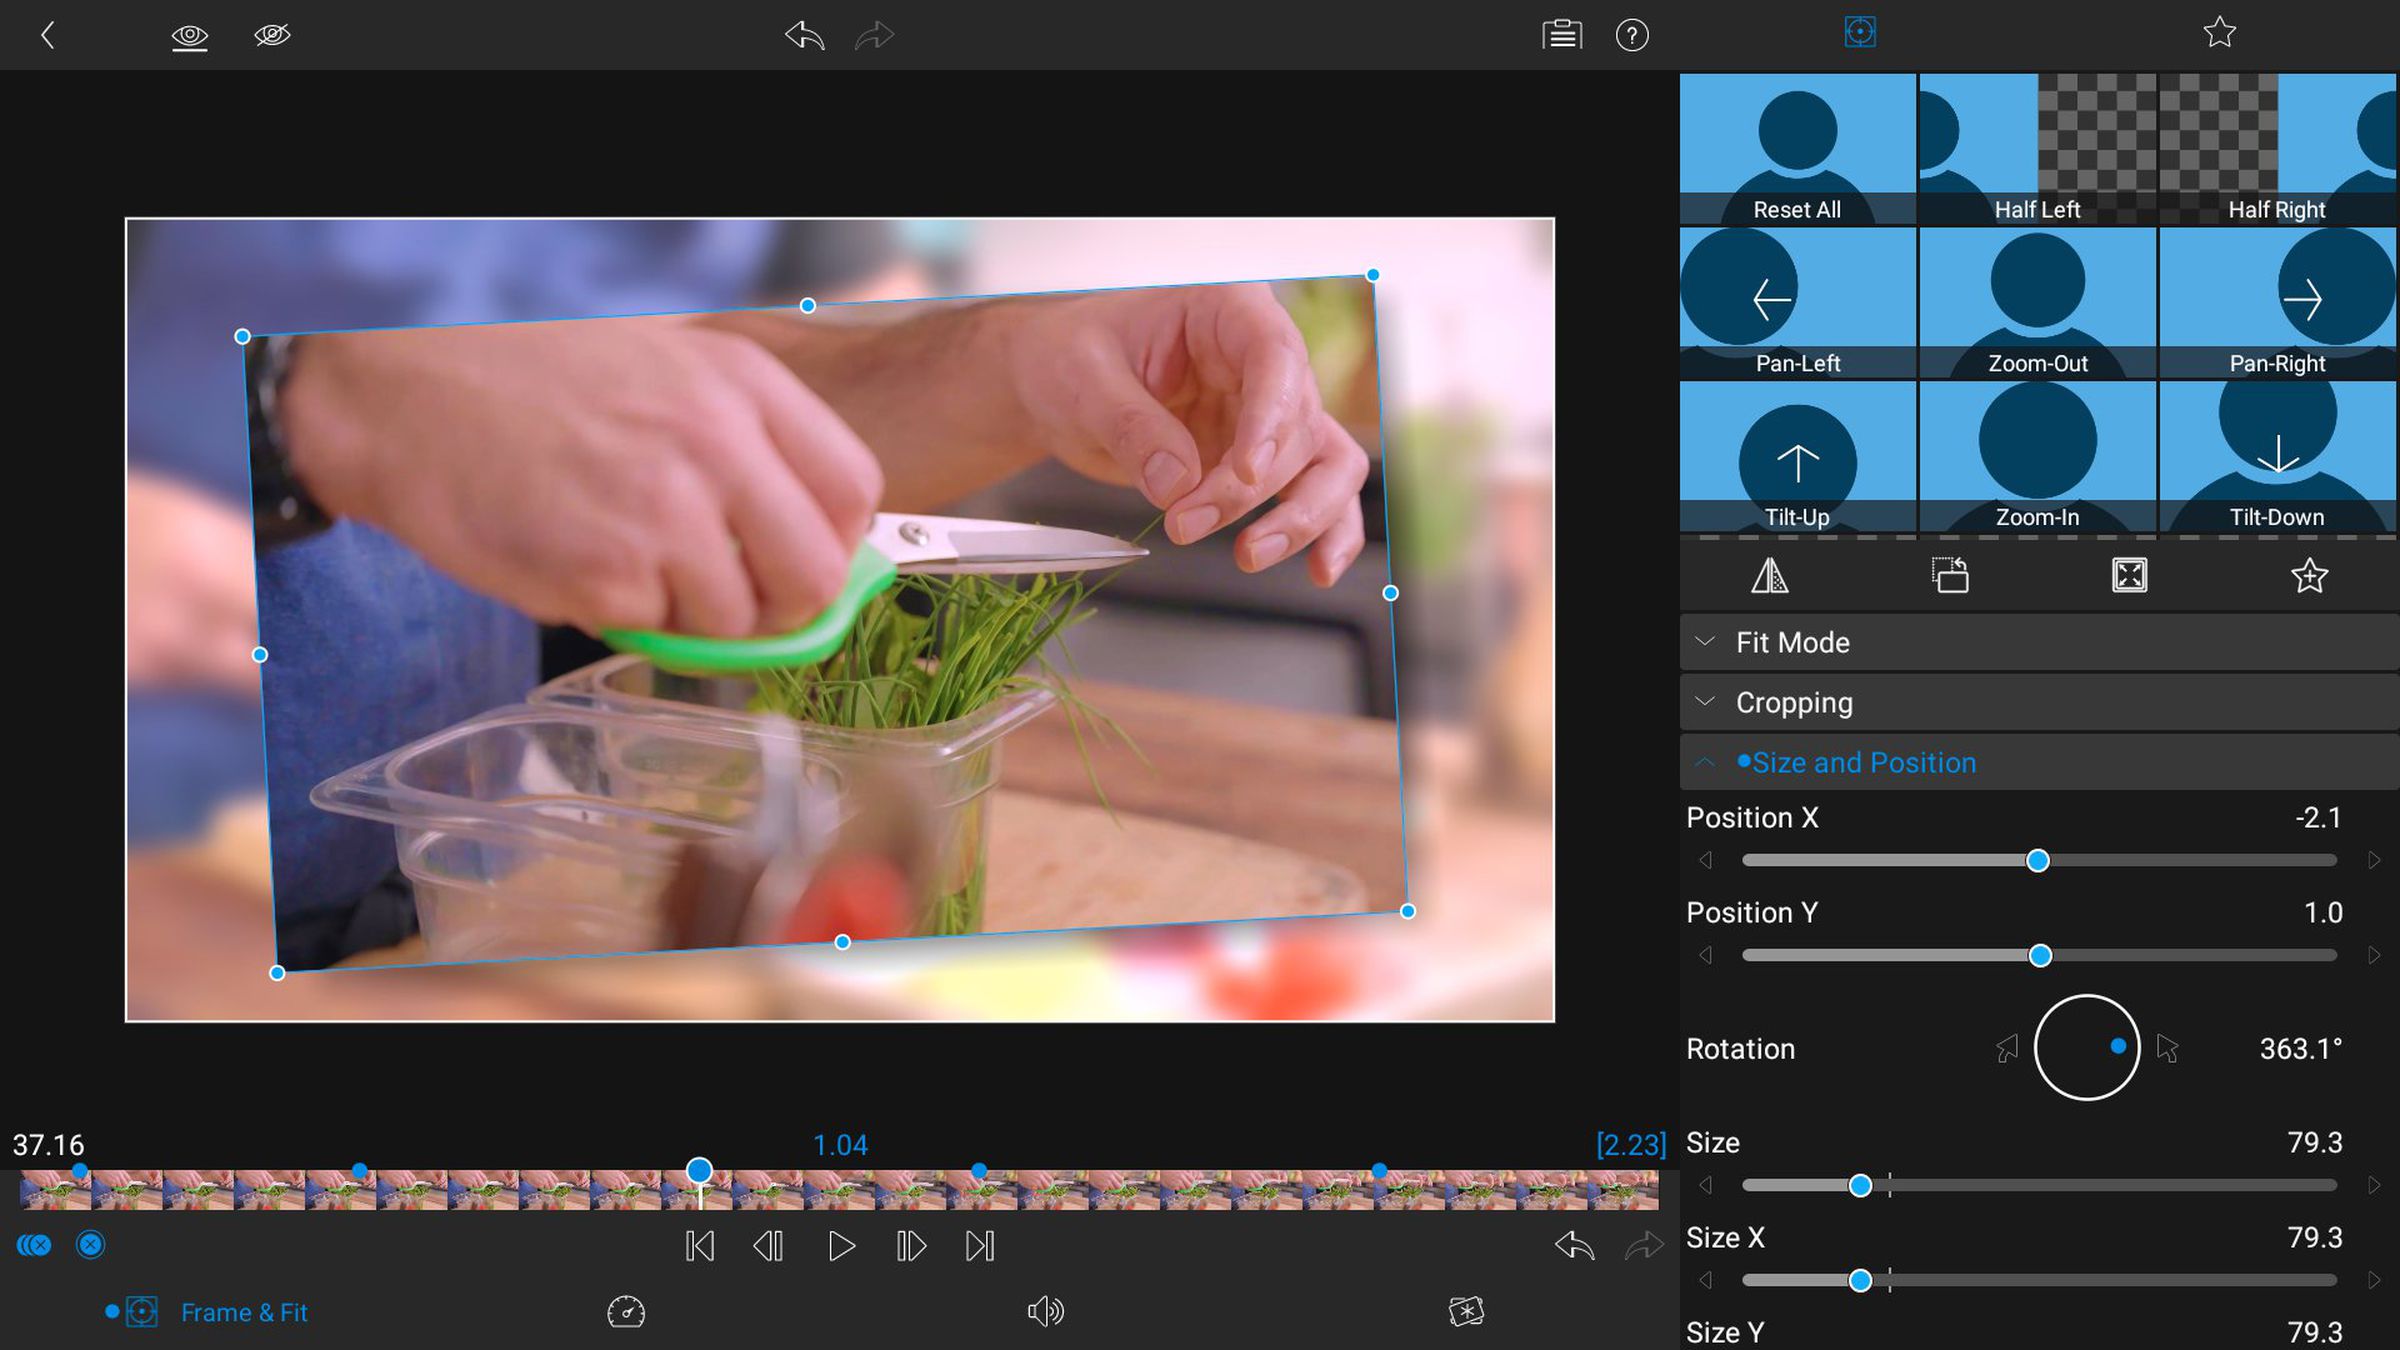 LumaFusion video editor is now widely available for Android and ChromeOS

End-shutdown